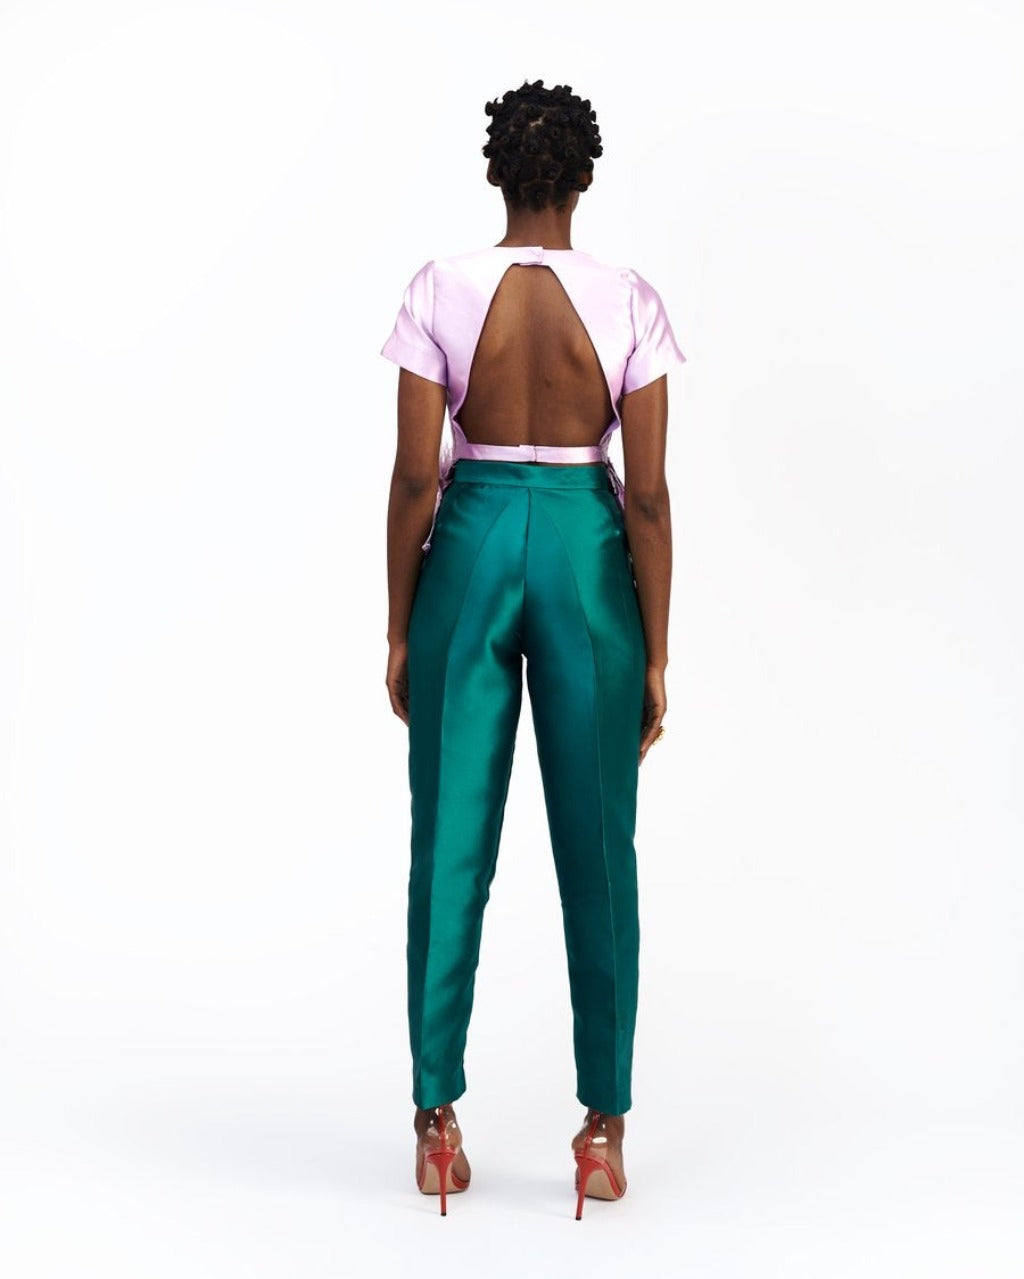 The back of A model wearing green silk satin pants with a purple satin top